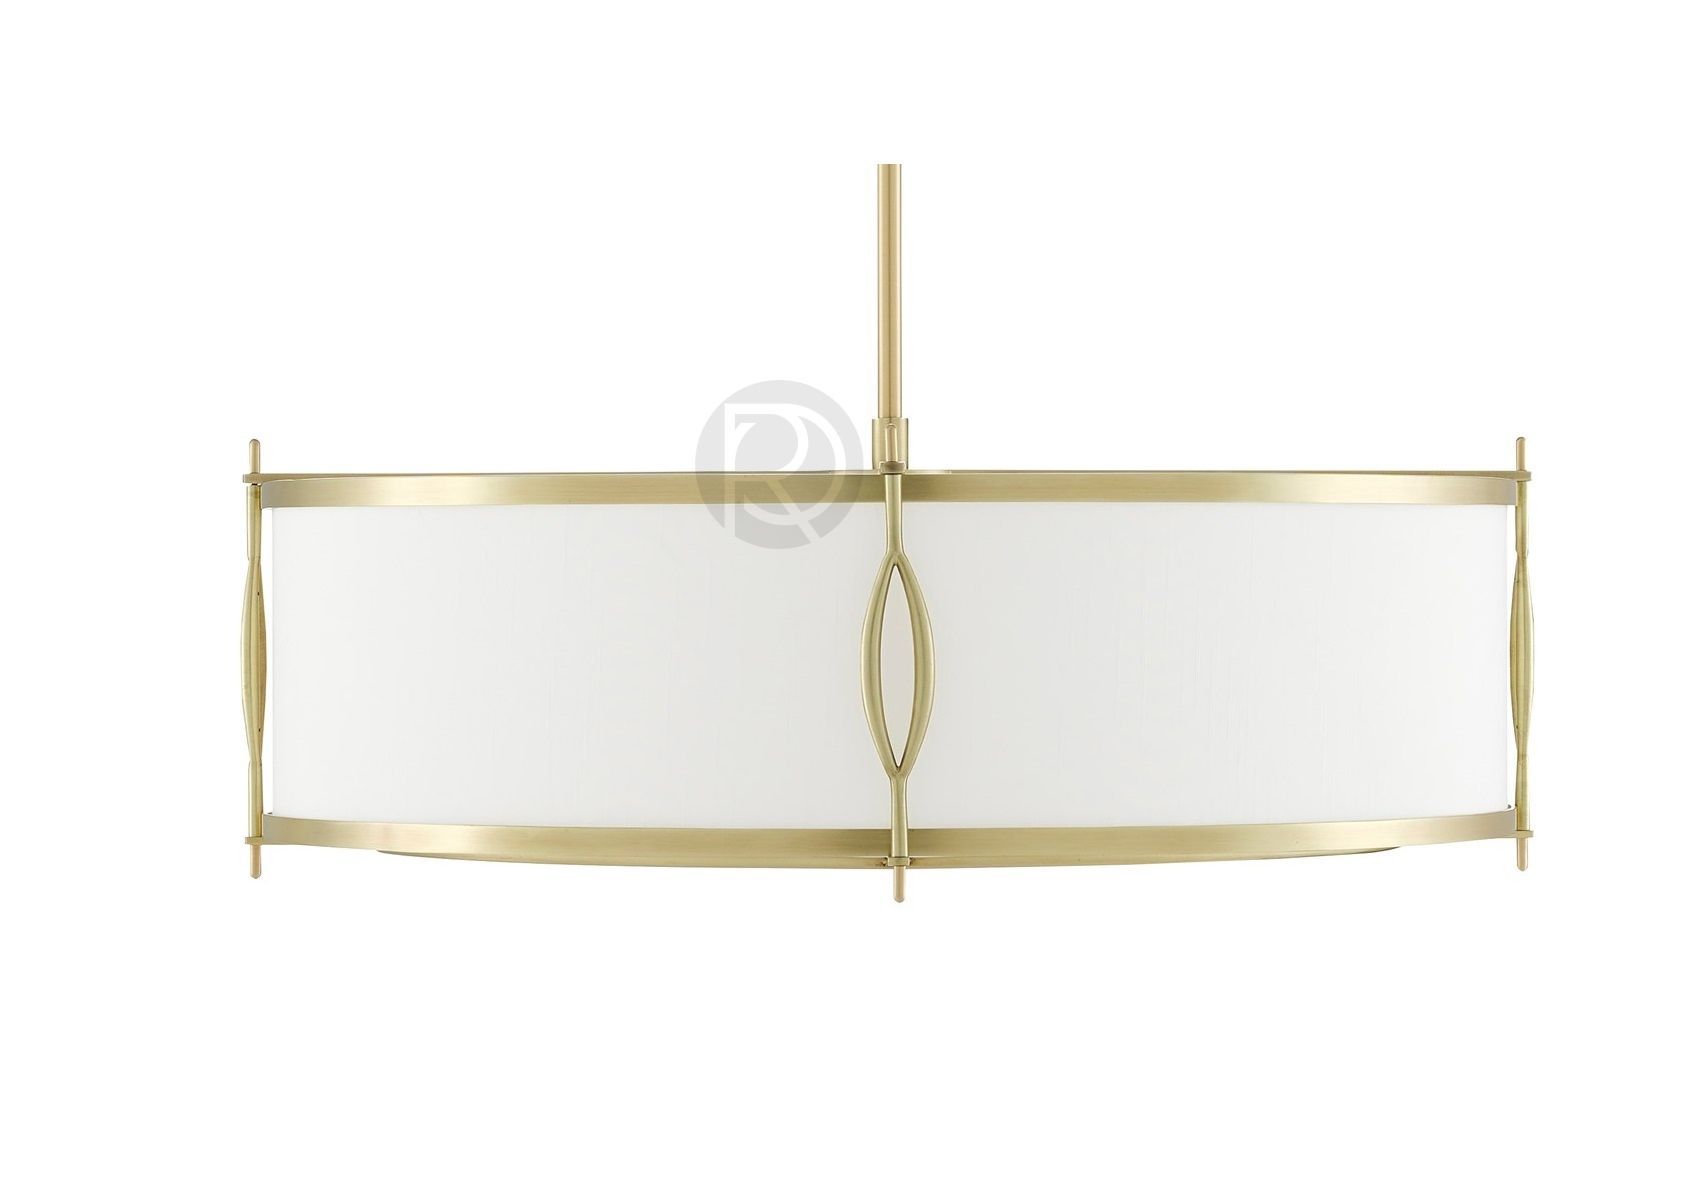 Hanging lamp JUNIA by Currey & Company